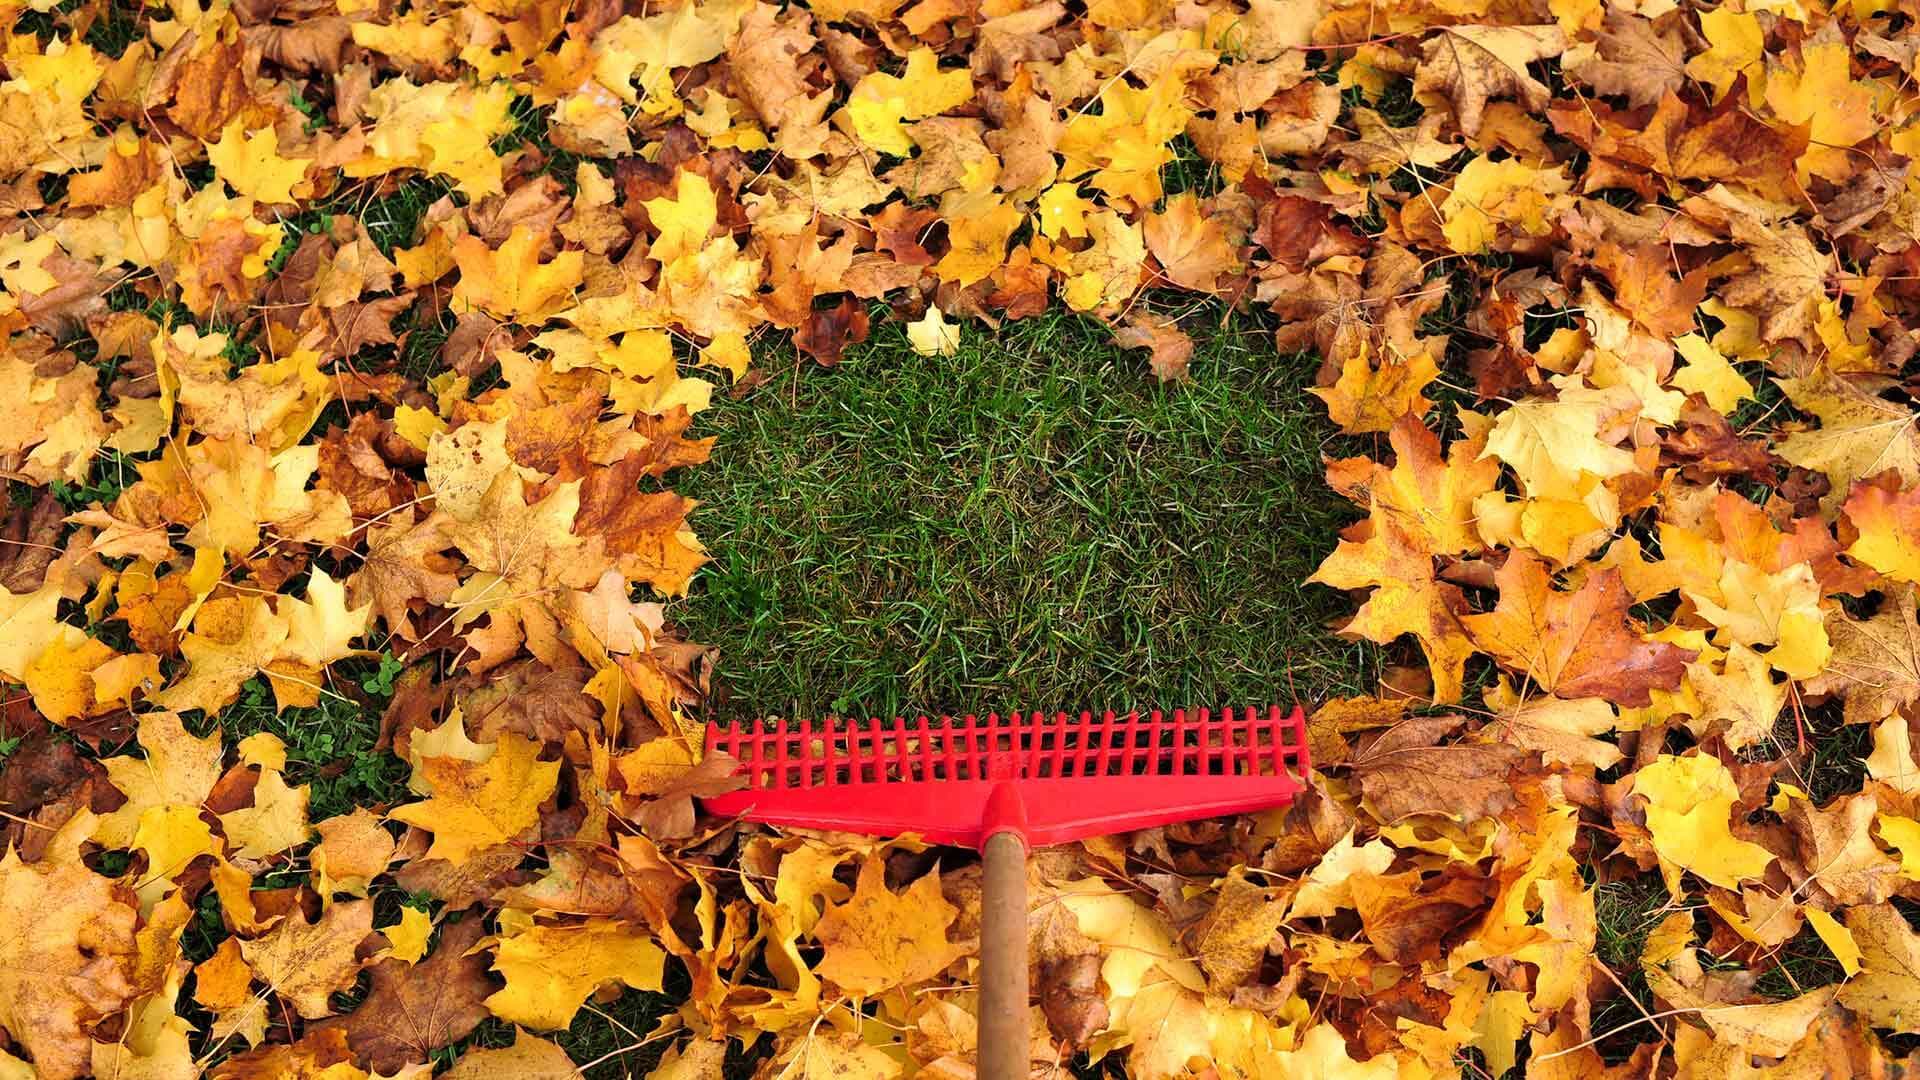 A red rake clears a patch of fallen leaves, revealing green grass